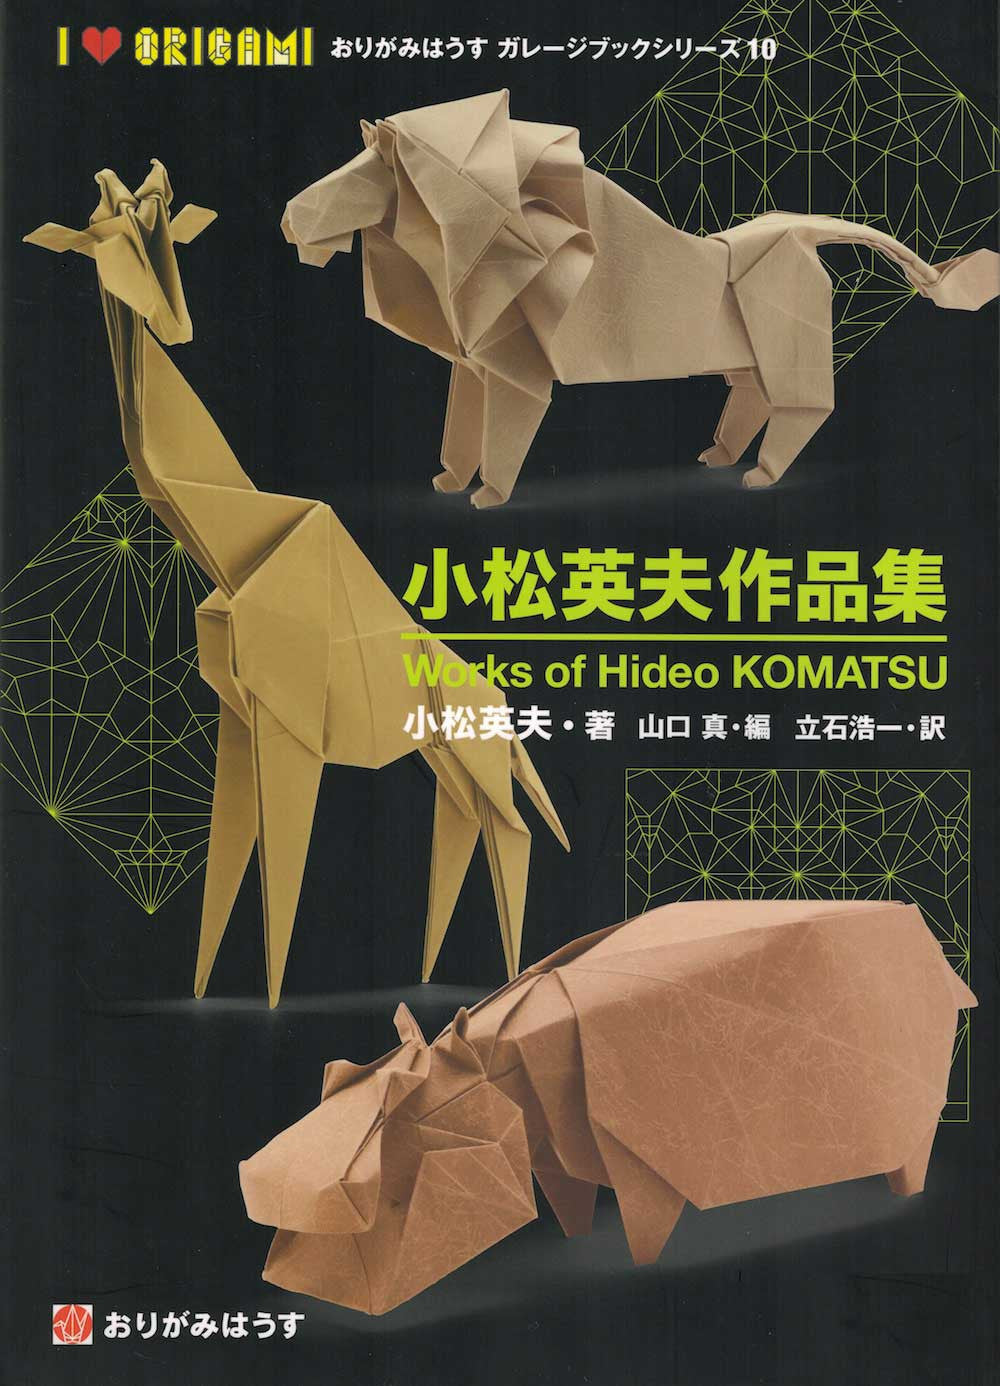 Works of Hideo Komatsu Paper Tree The Origami Store